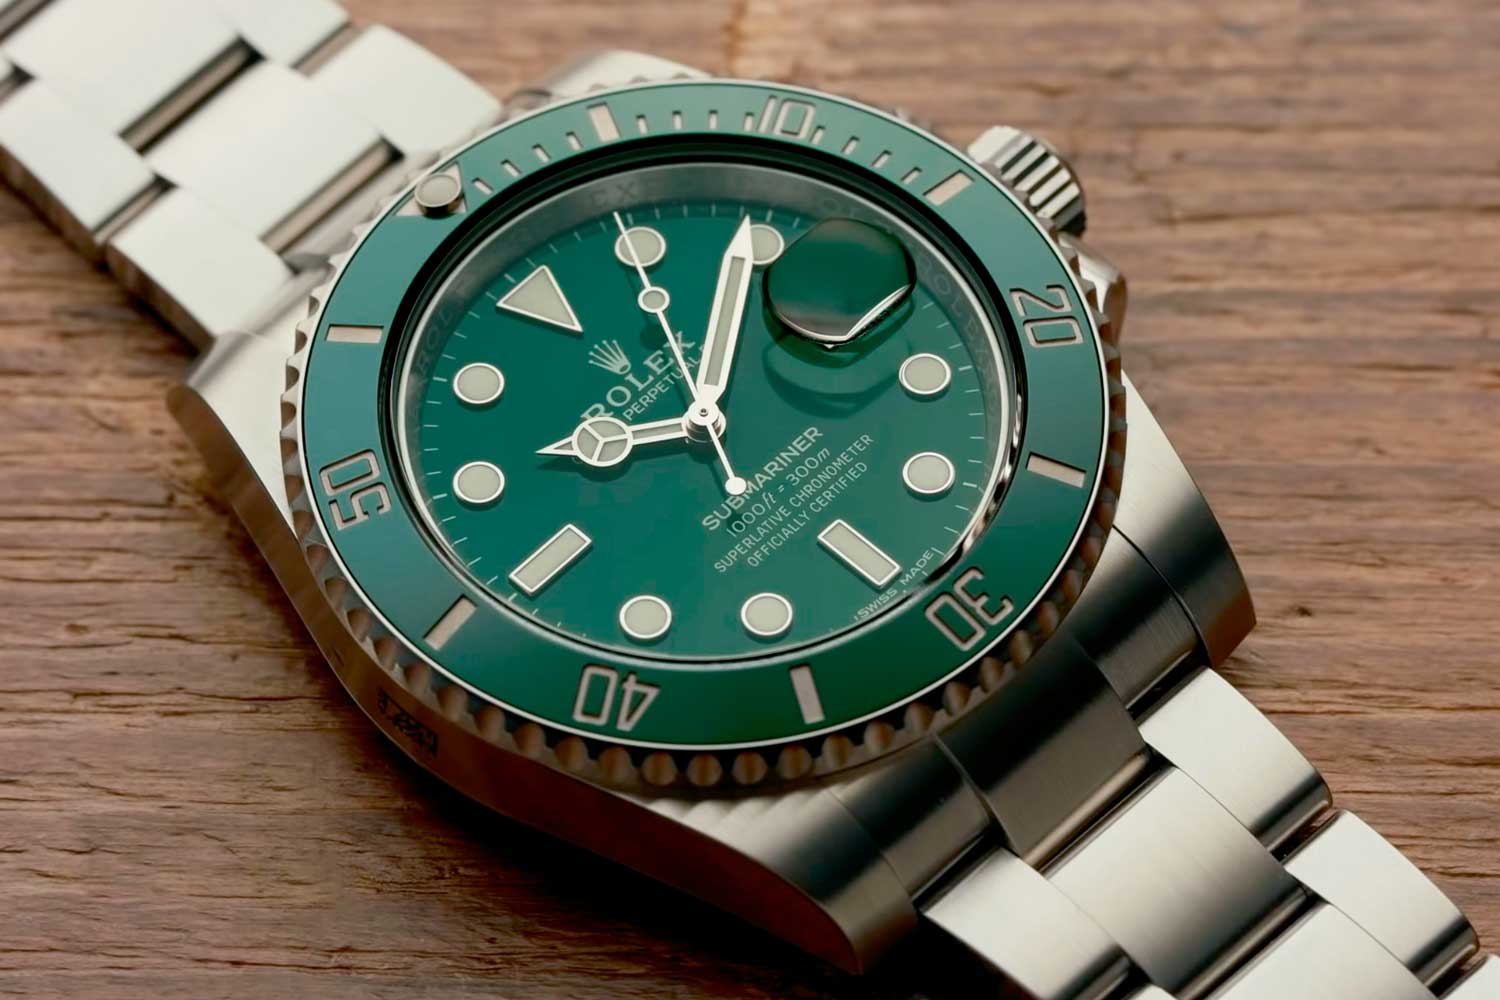 The 116610LV doubles down on the green theme with a green dial and green bezel